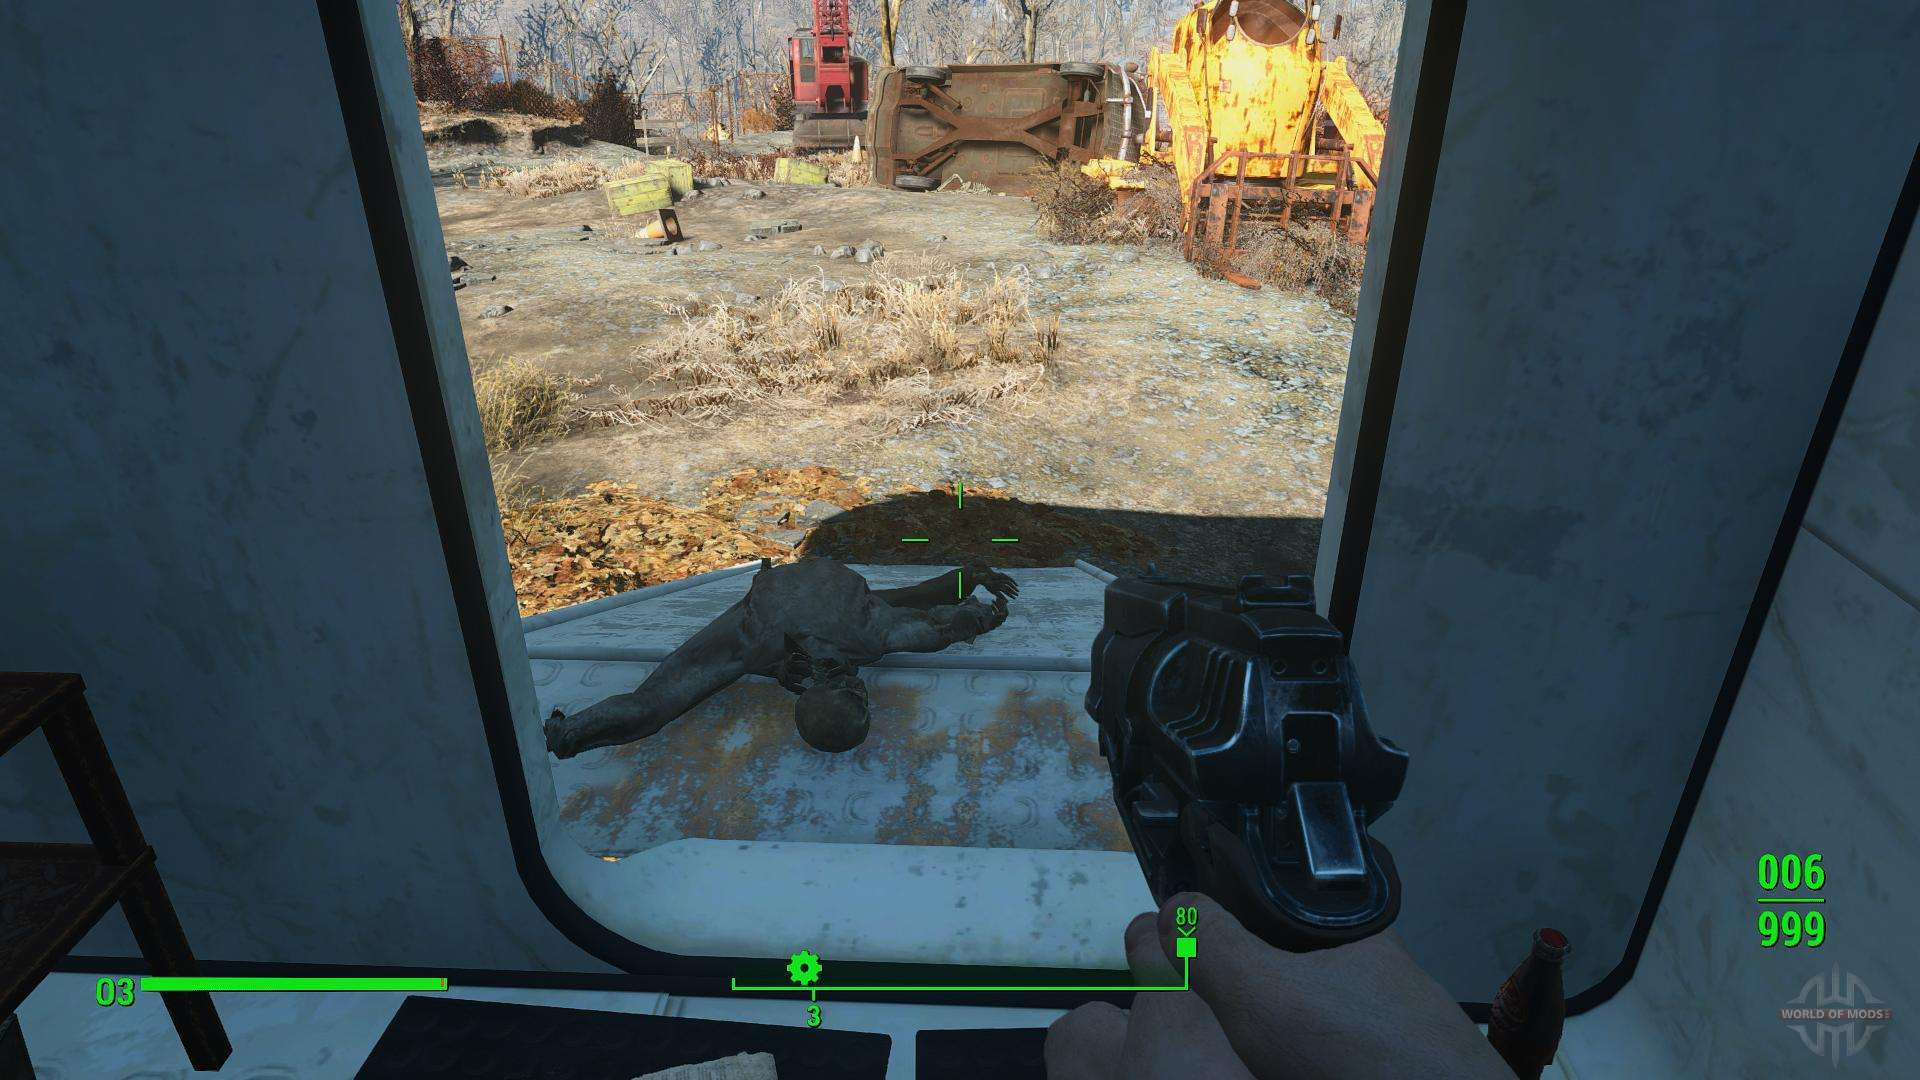 where to find ammo in fallout 4 reddit